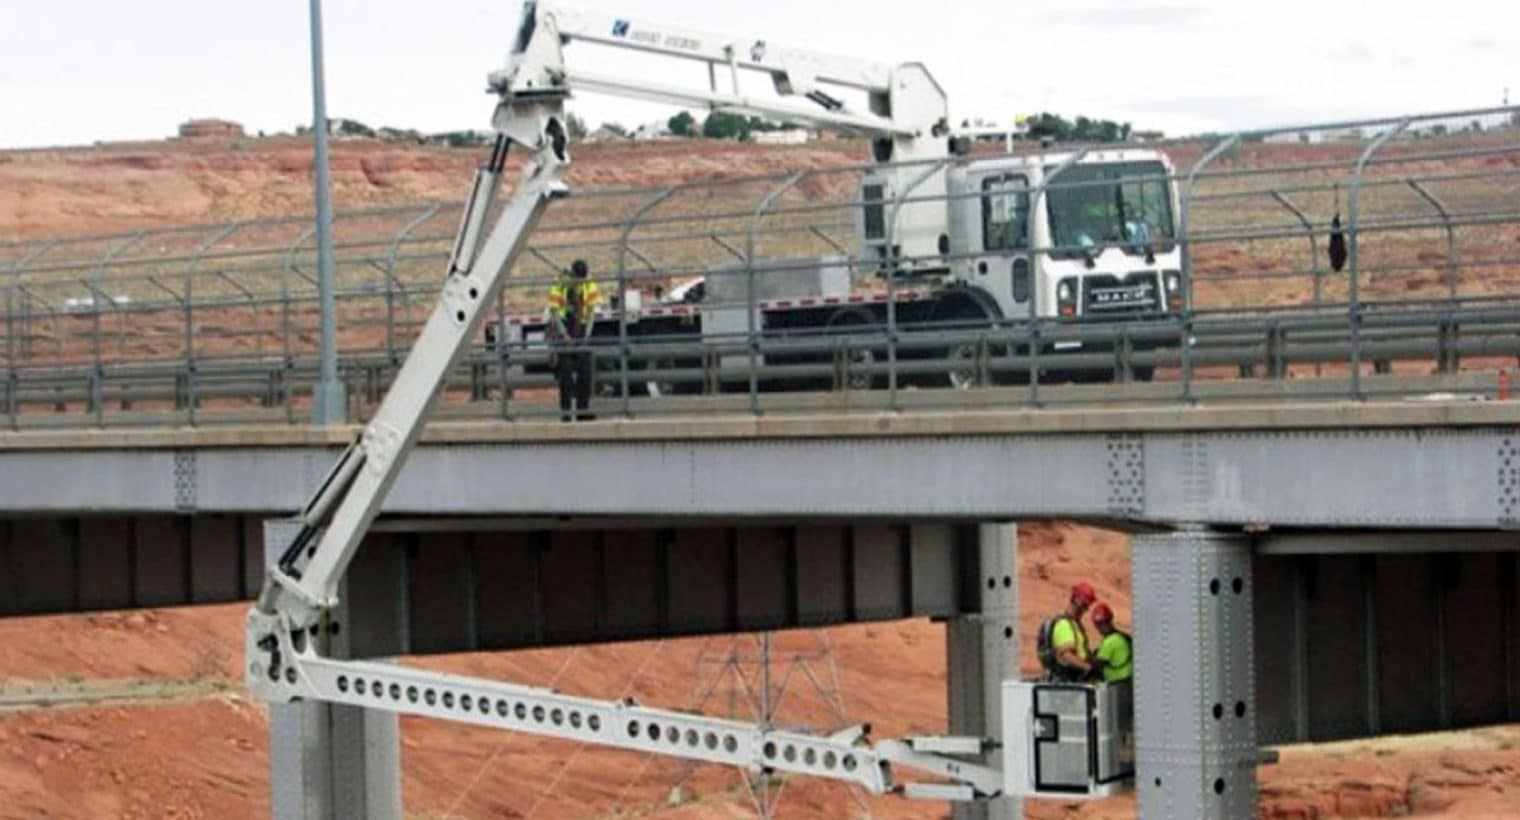 McClain and Company for Quality Bridge Inspection and Maintenance Equipment Rentals